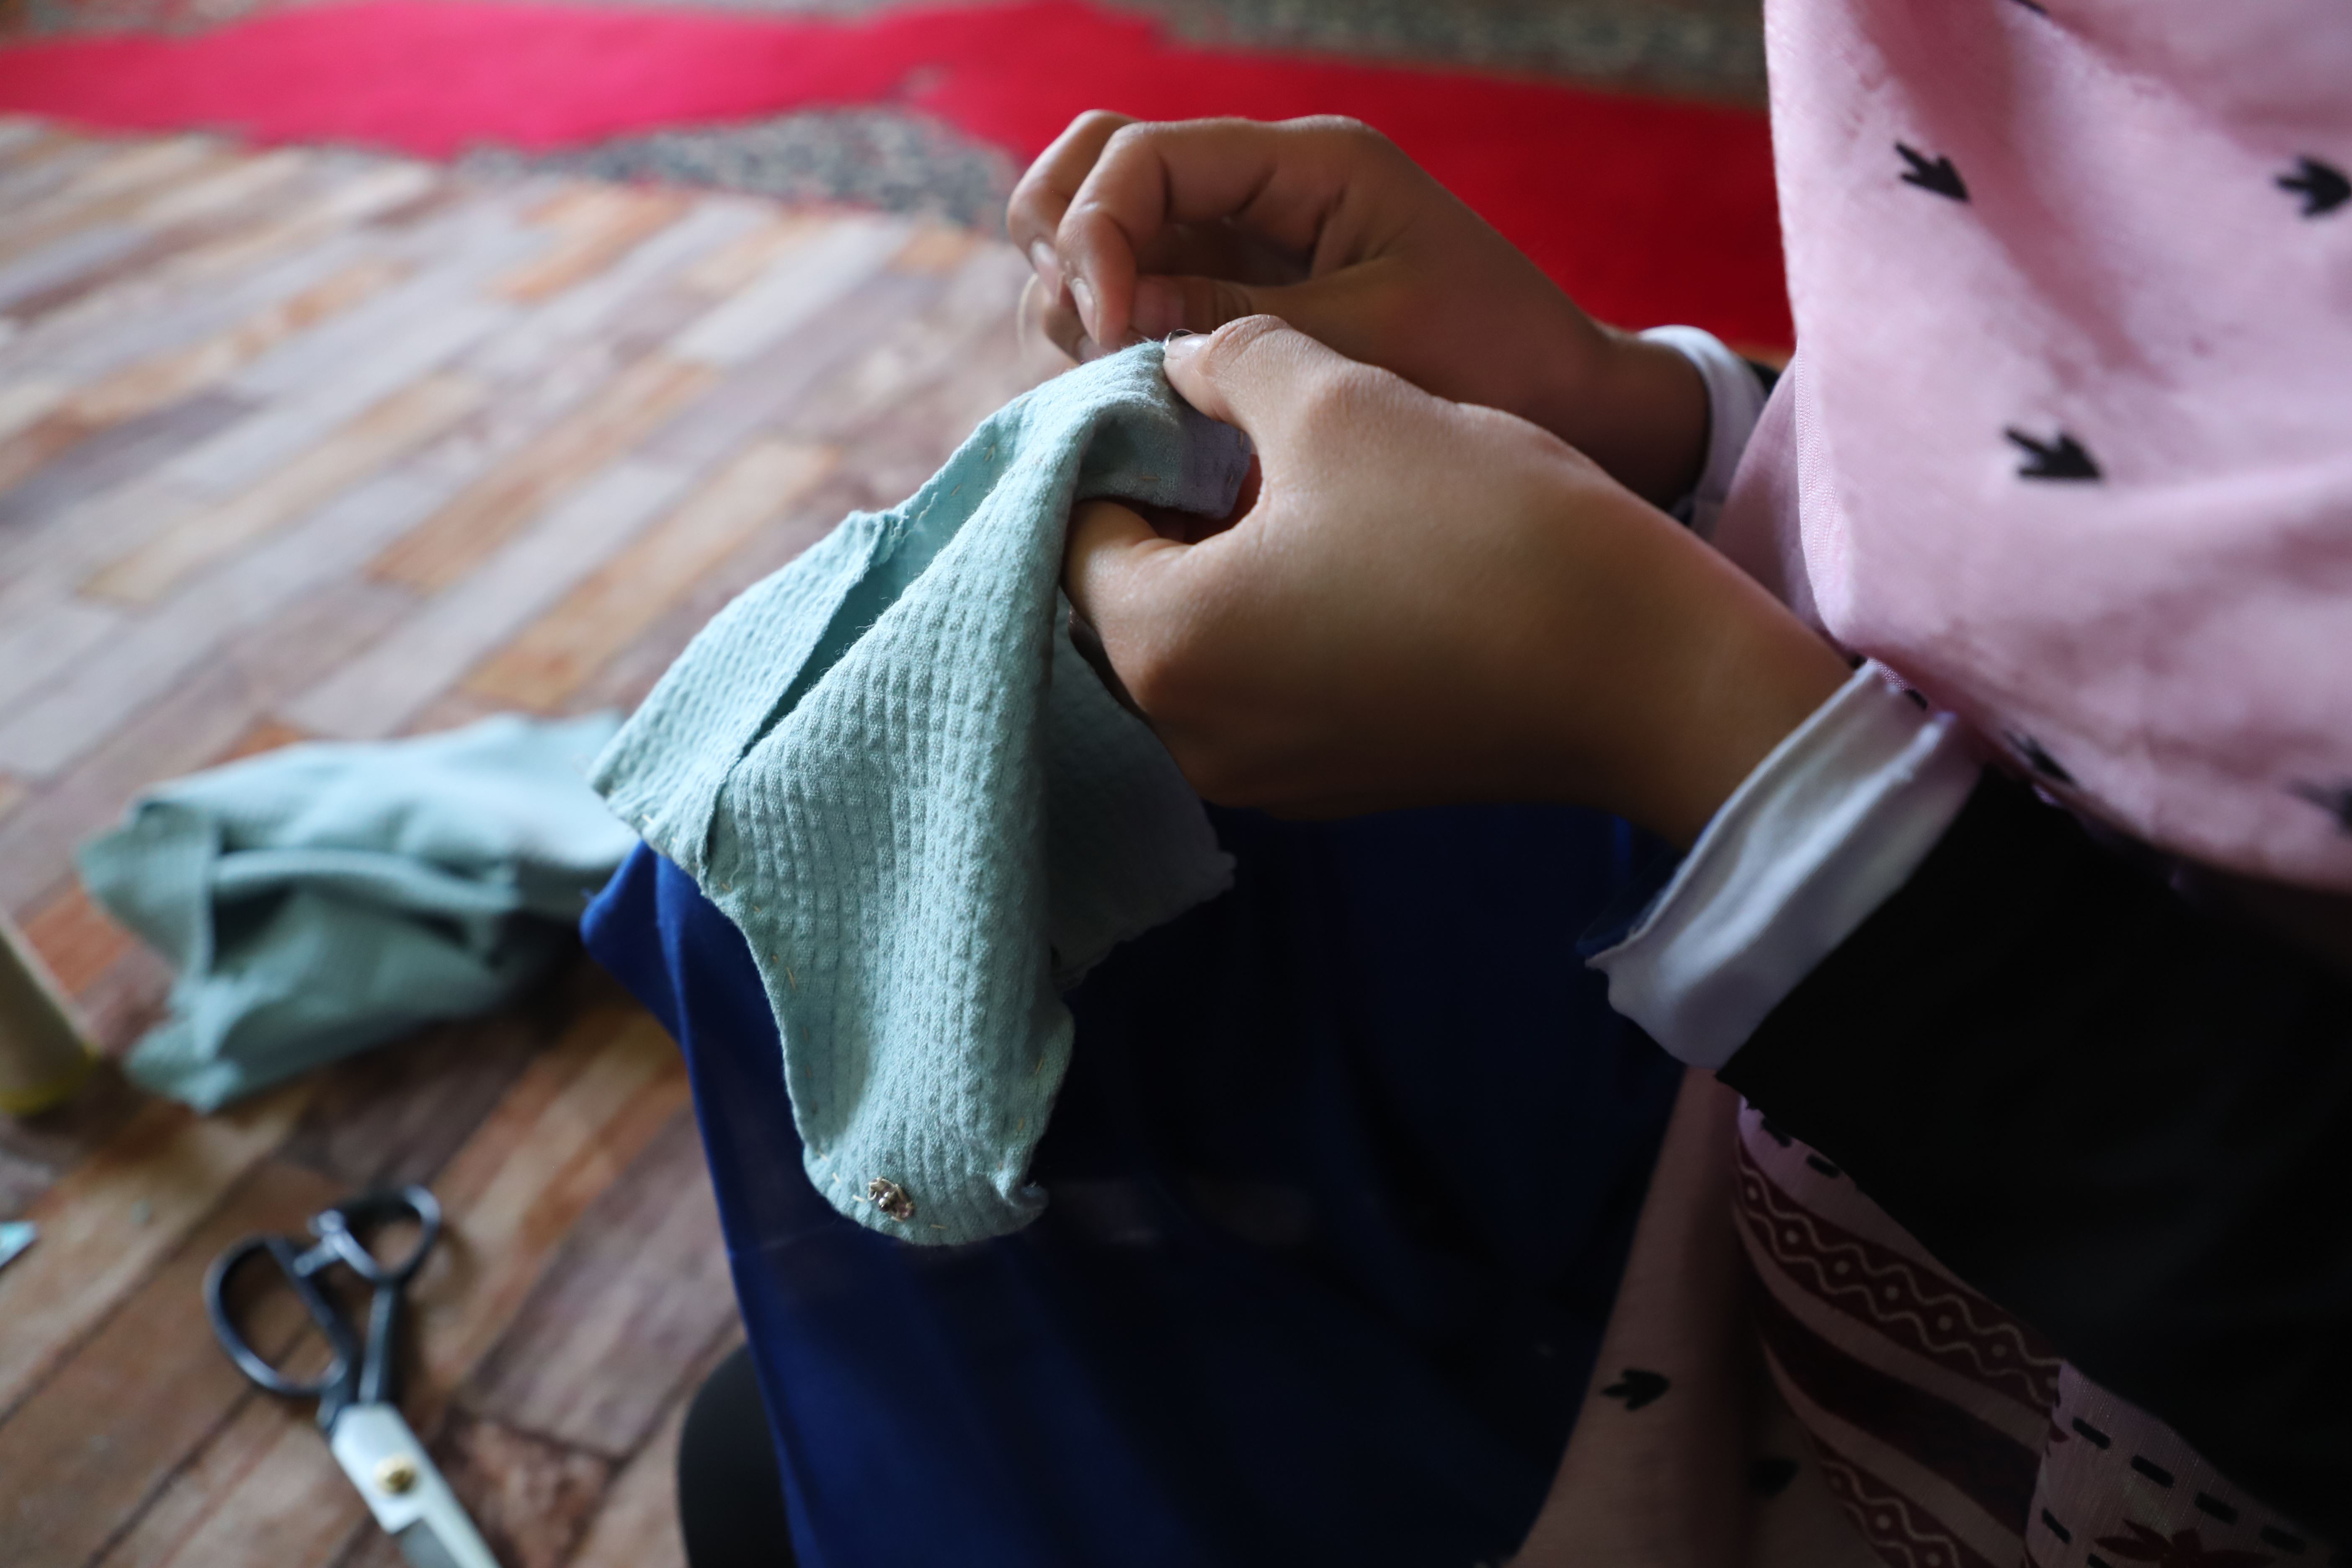 A child in Afghanistan making a reusable menstrual pad by hand.